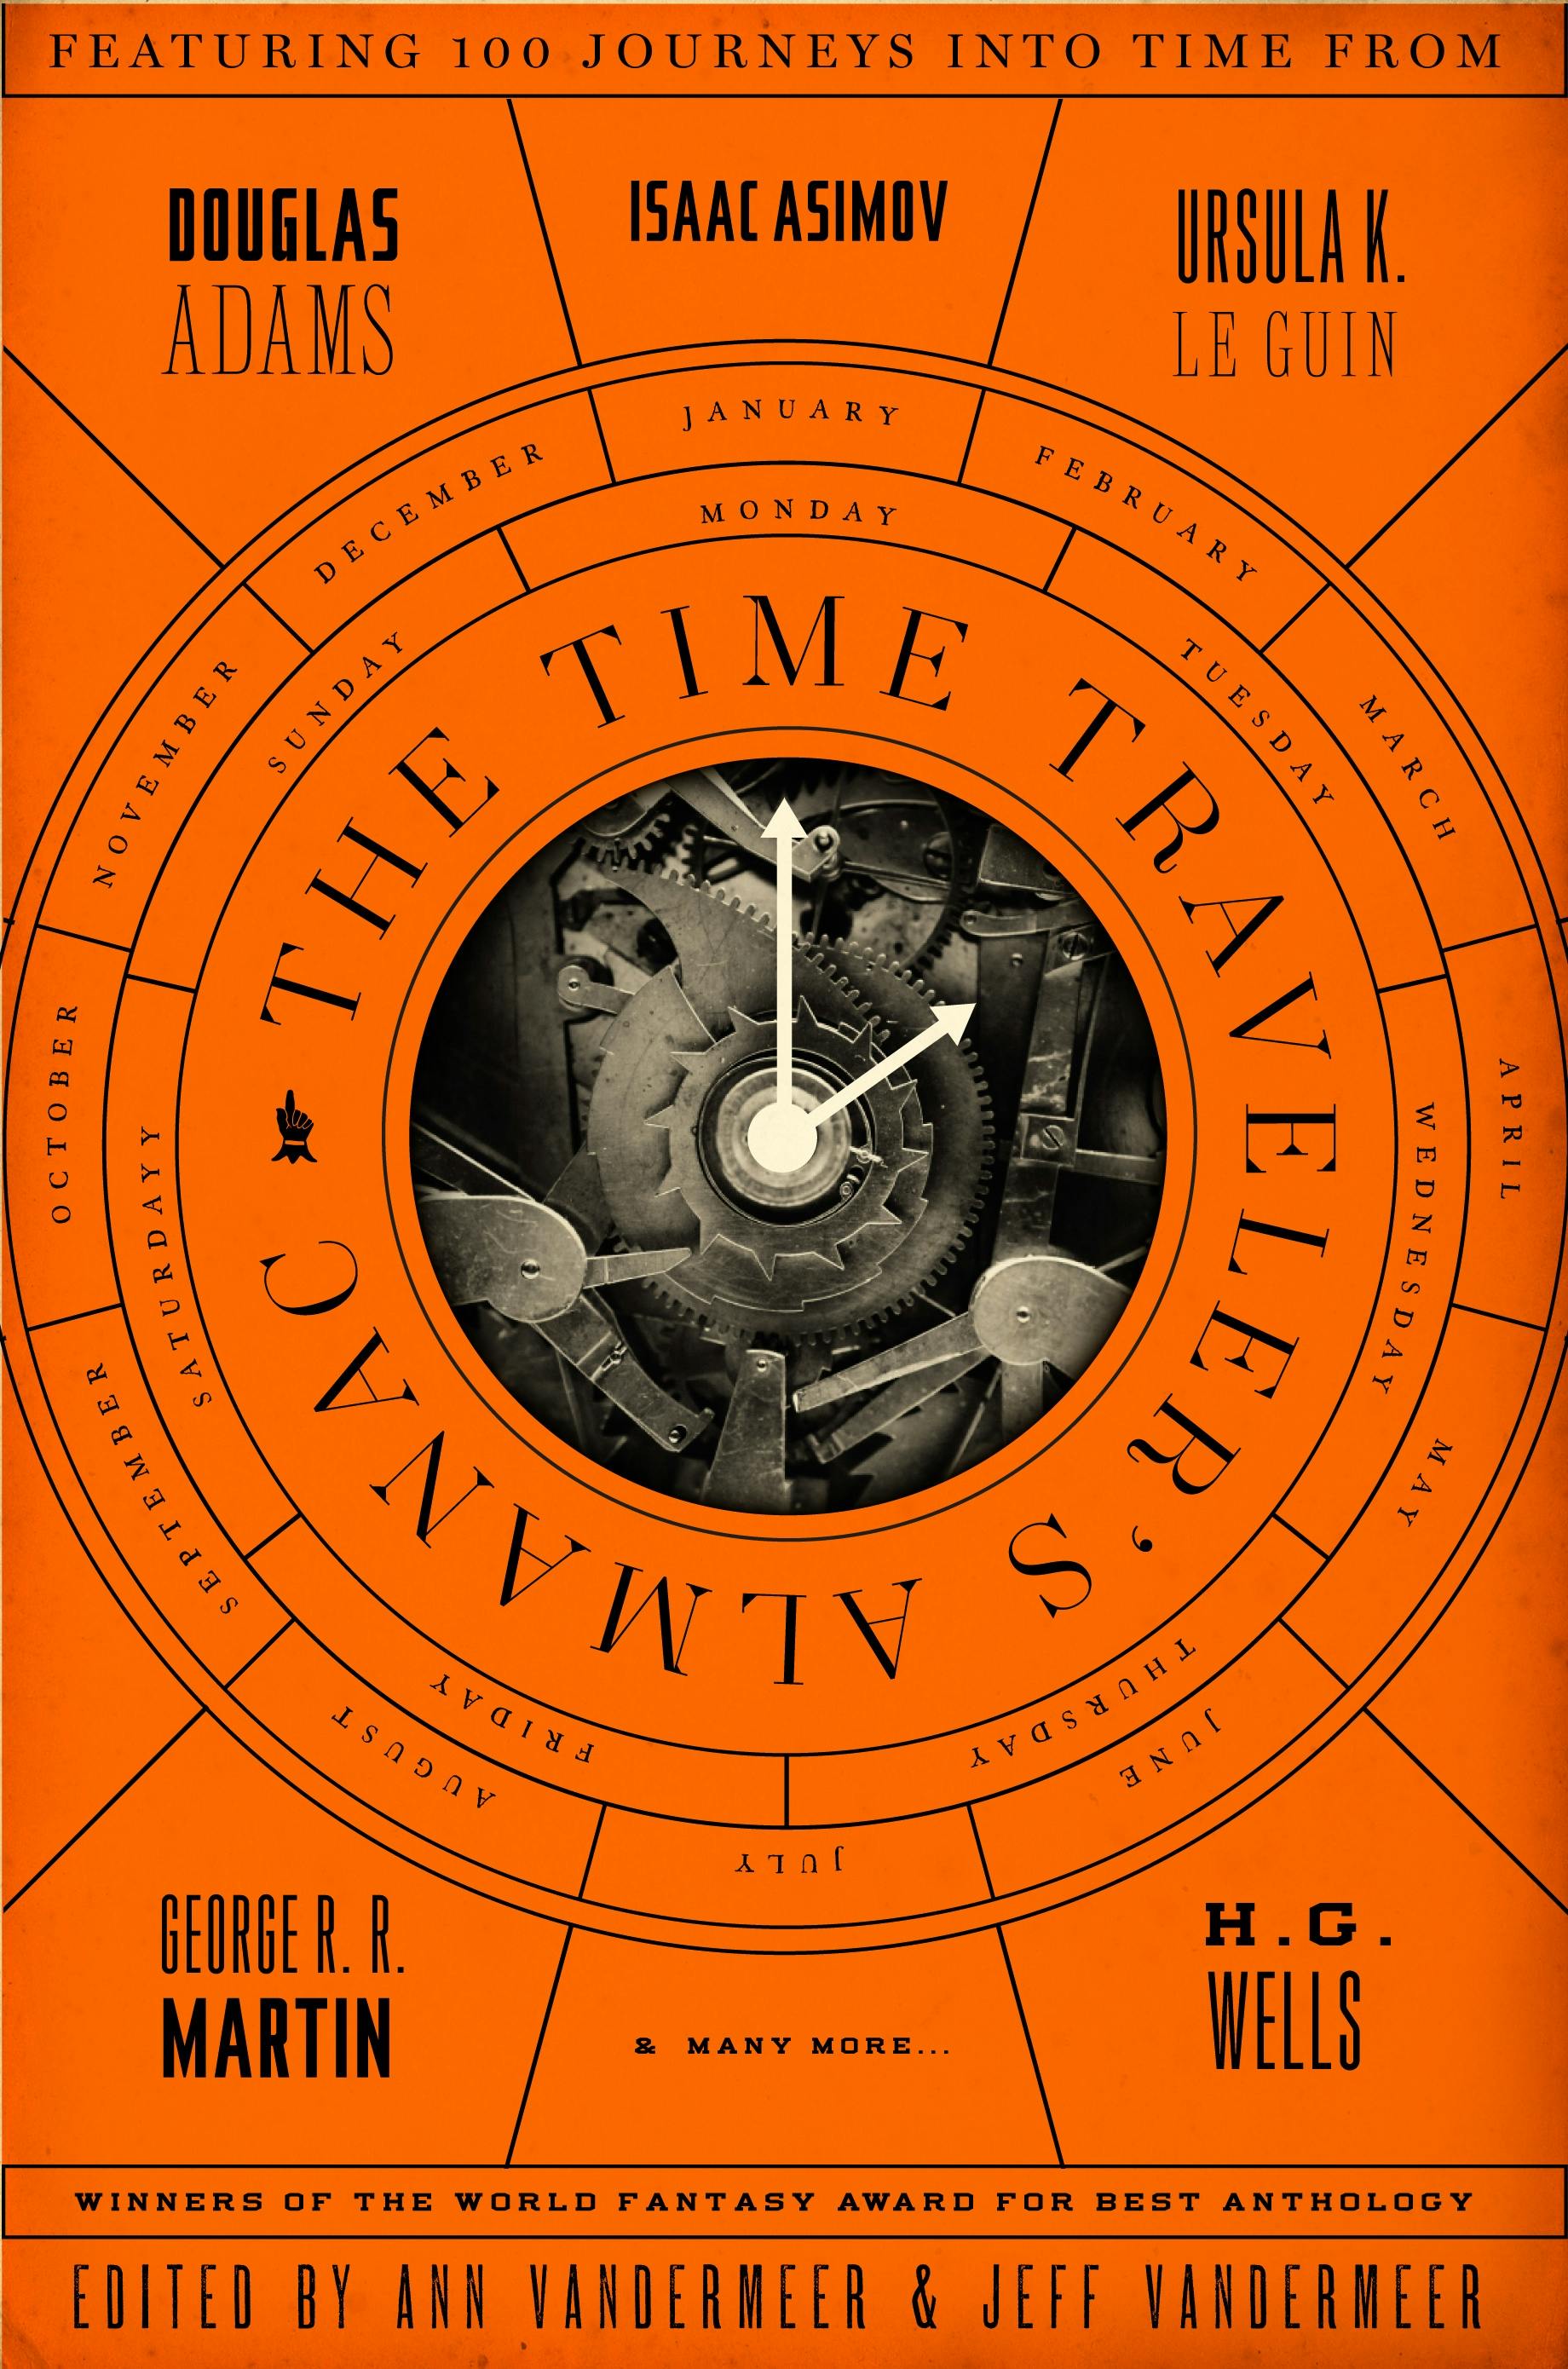 Cover for the book titled as: The Time Traveler's Almanac